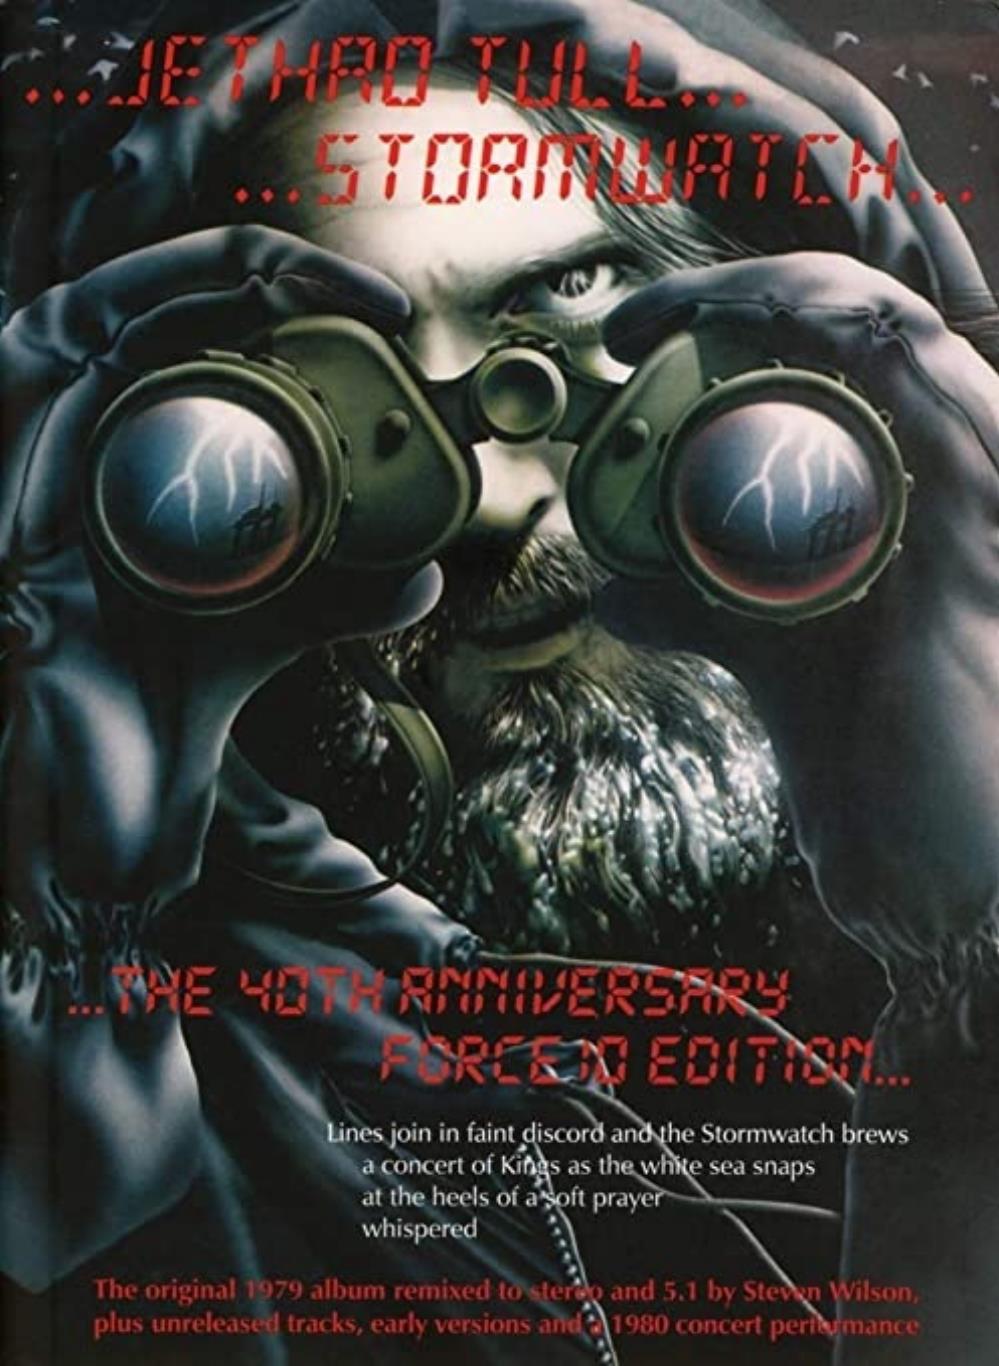 Jethro Tull - Stormwatch (The 40th Anniversary Force 10 Edition) CD (album) cover